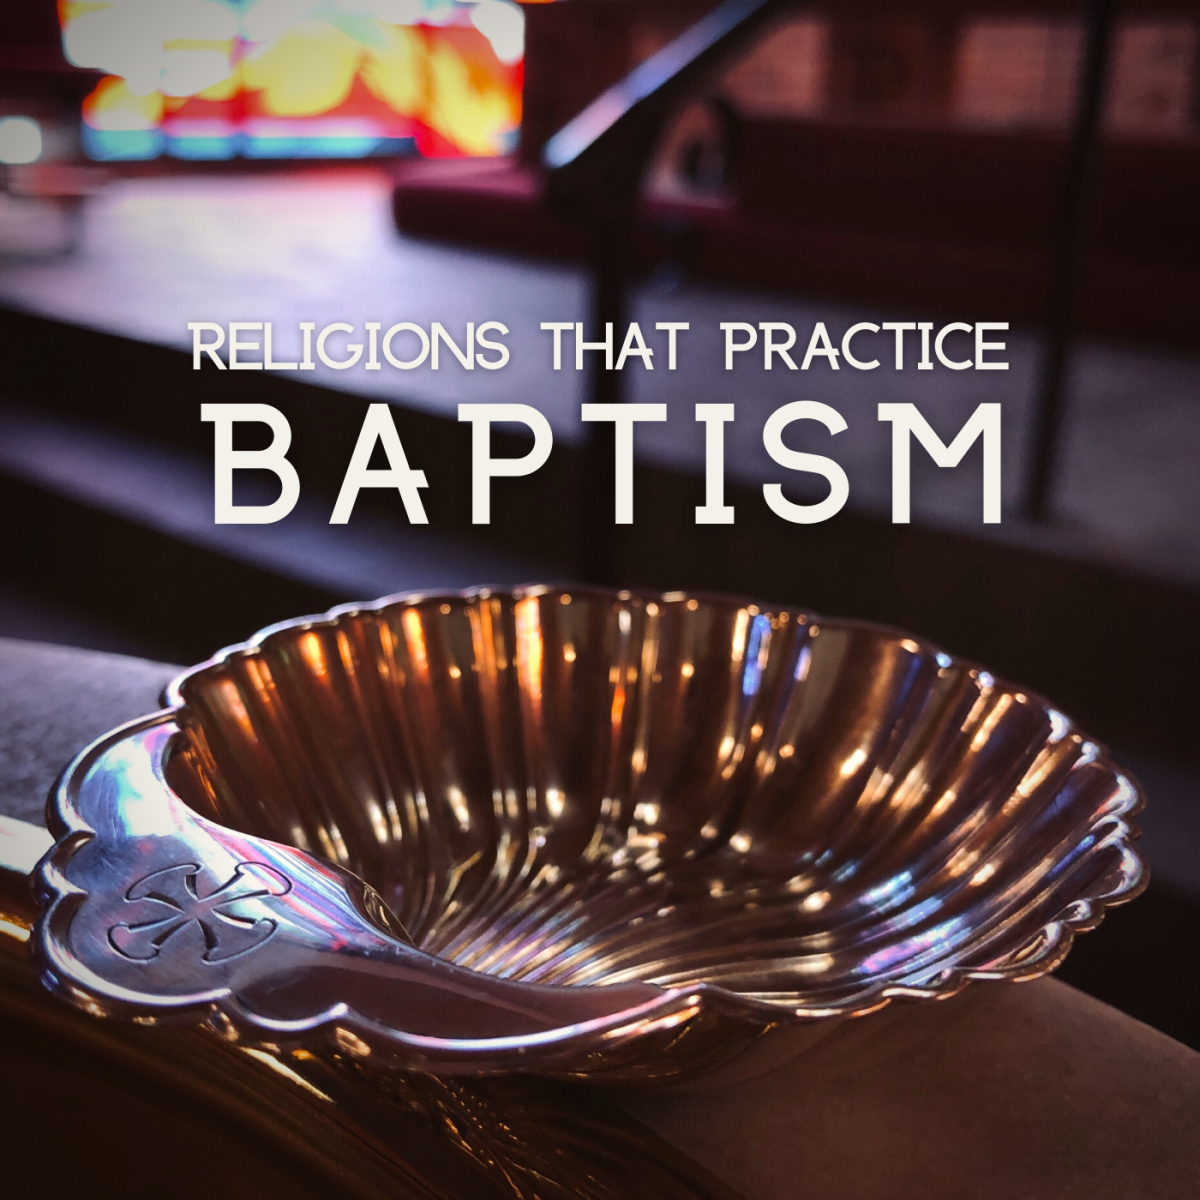 Many religions practice baptism, but each has their own interpretation of its necessity and meaning. 